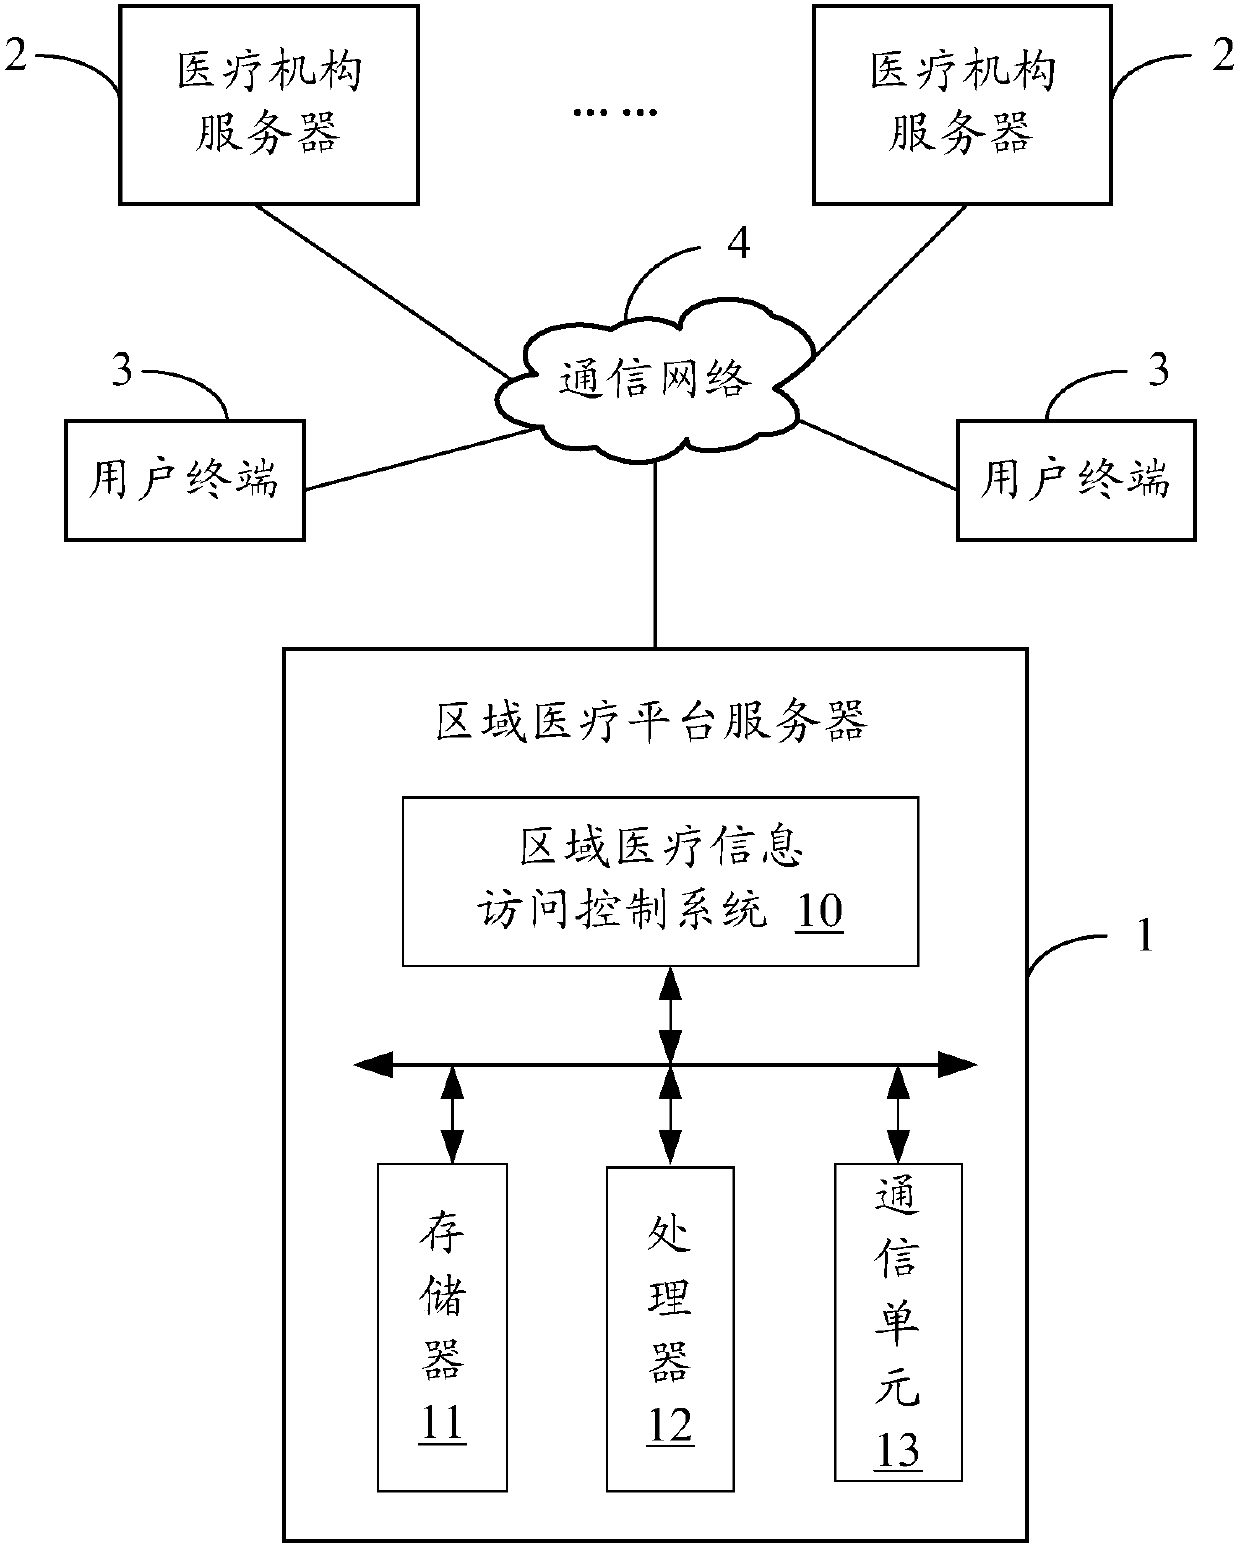 Regional medical information access control system and method